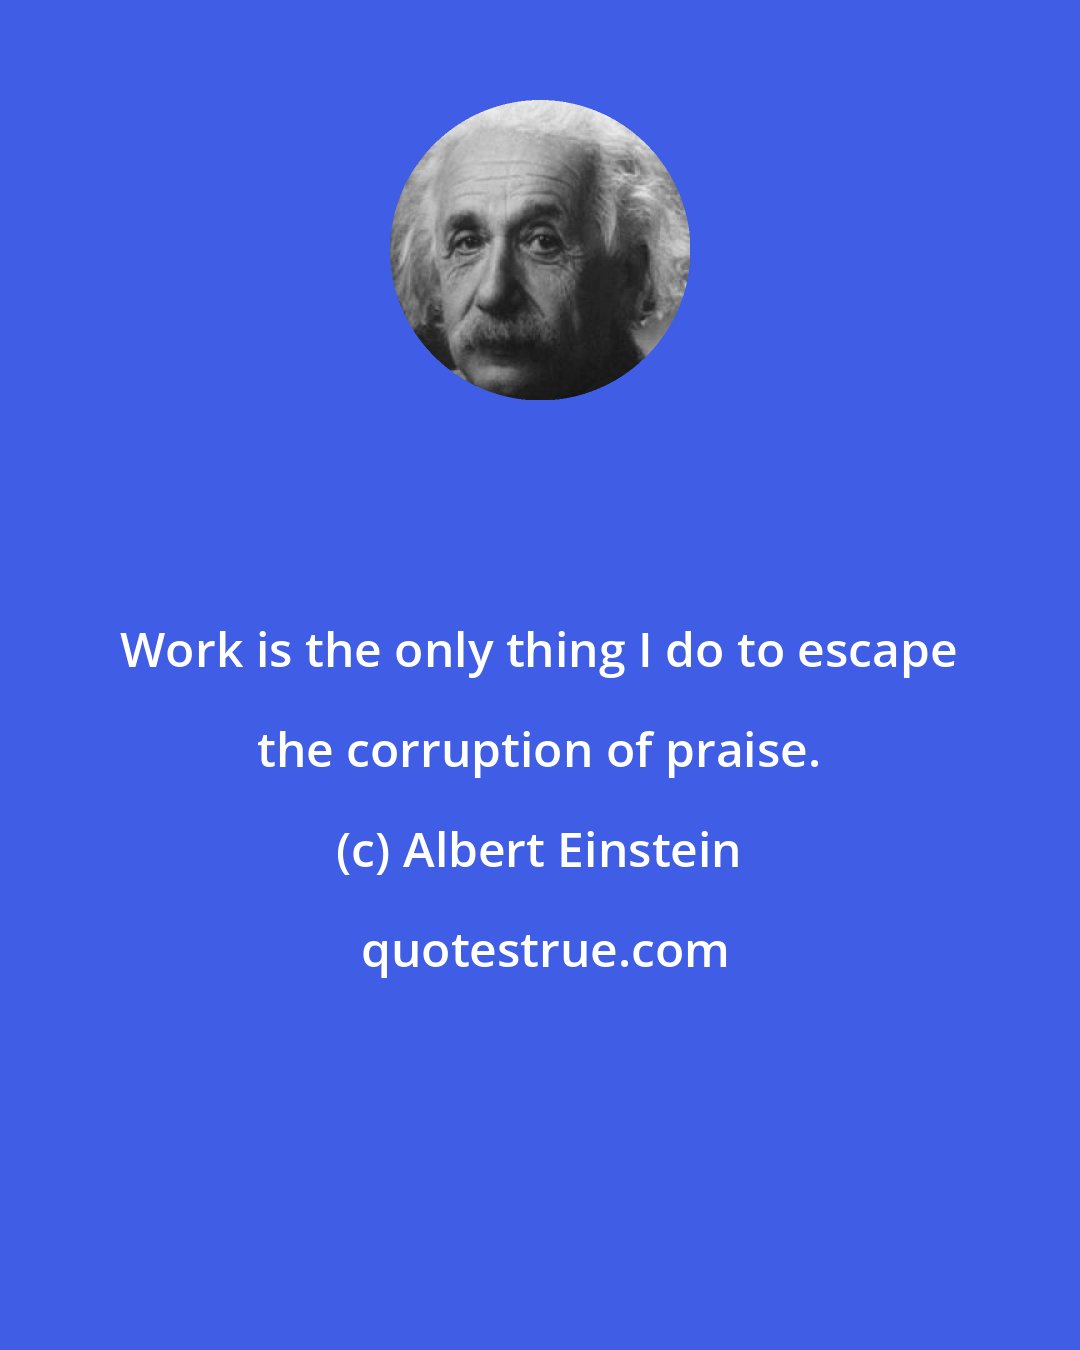 Albert Einstein: Work is the only thing I do to escape the corruption of praise.